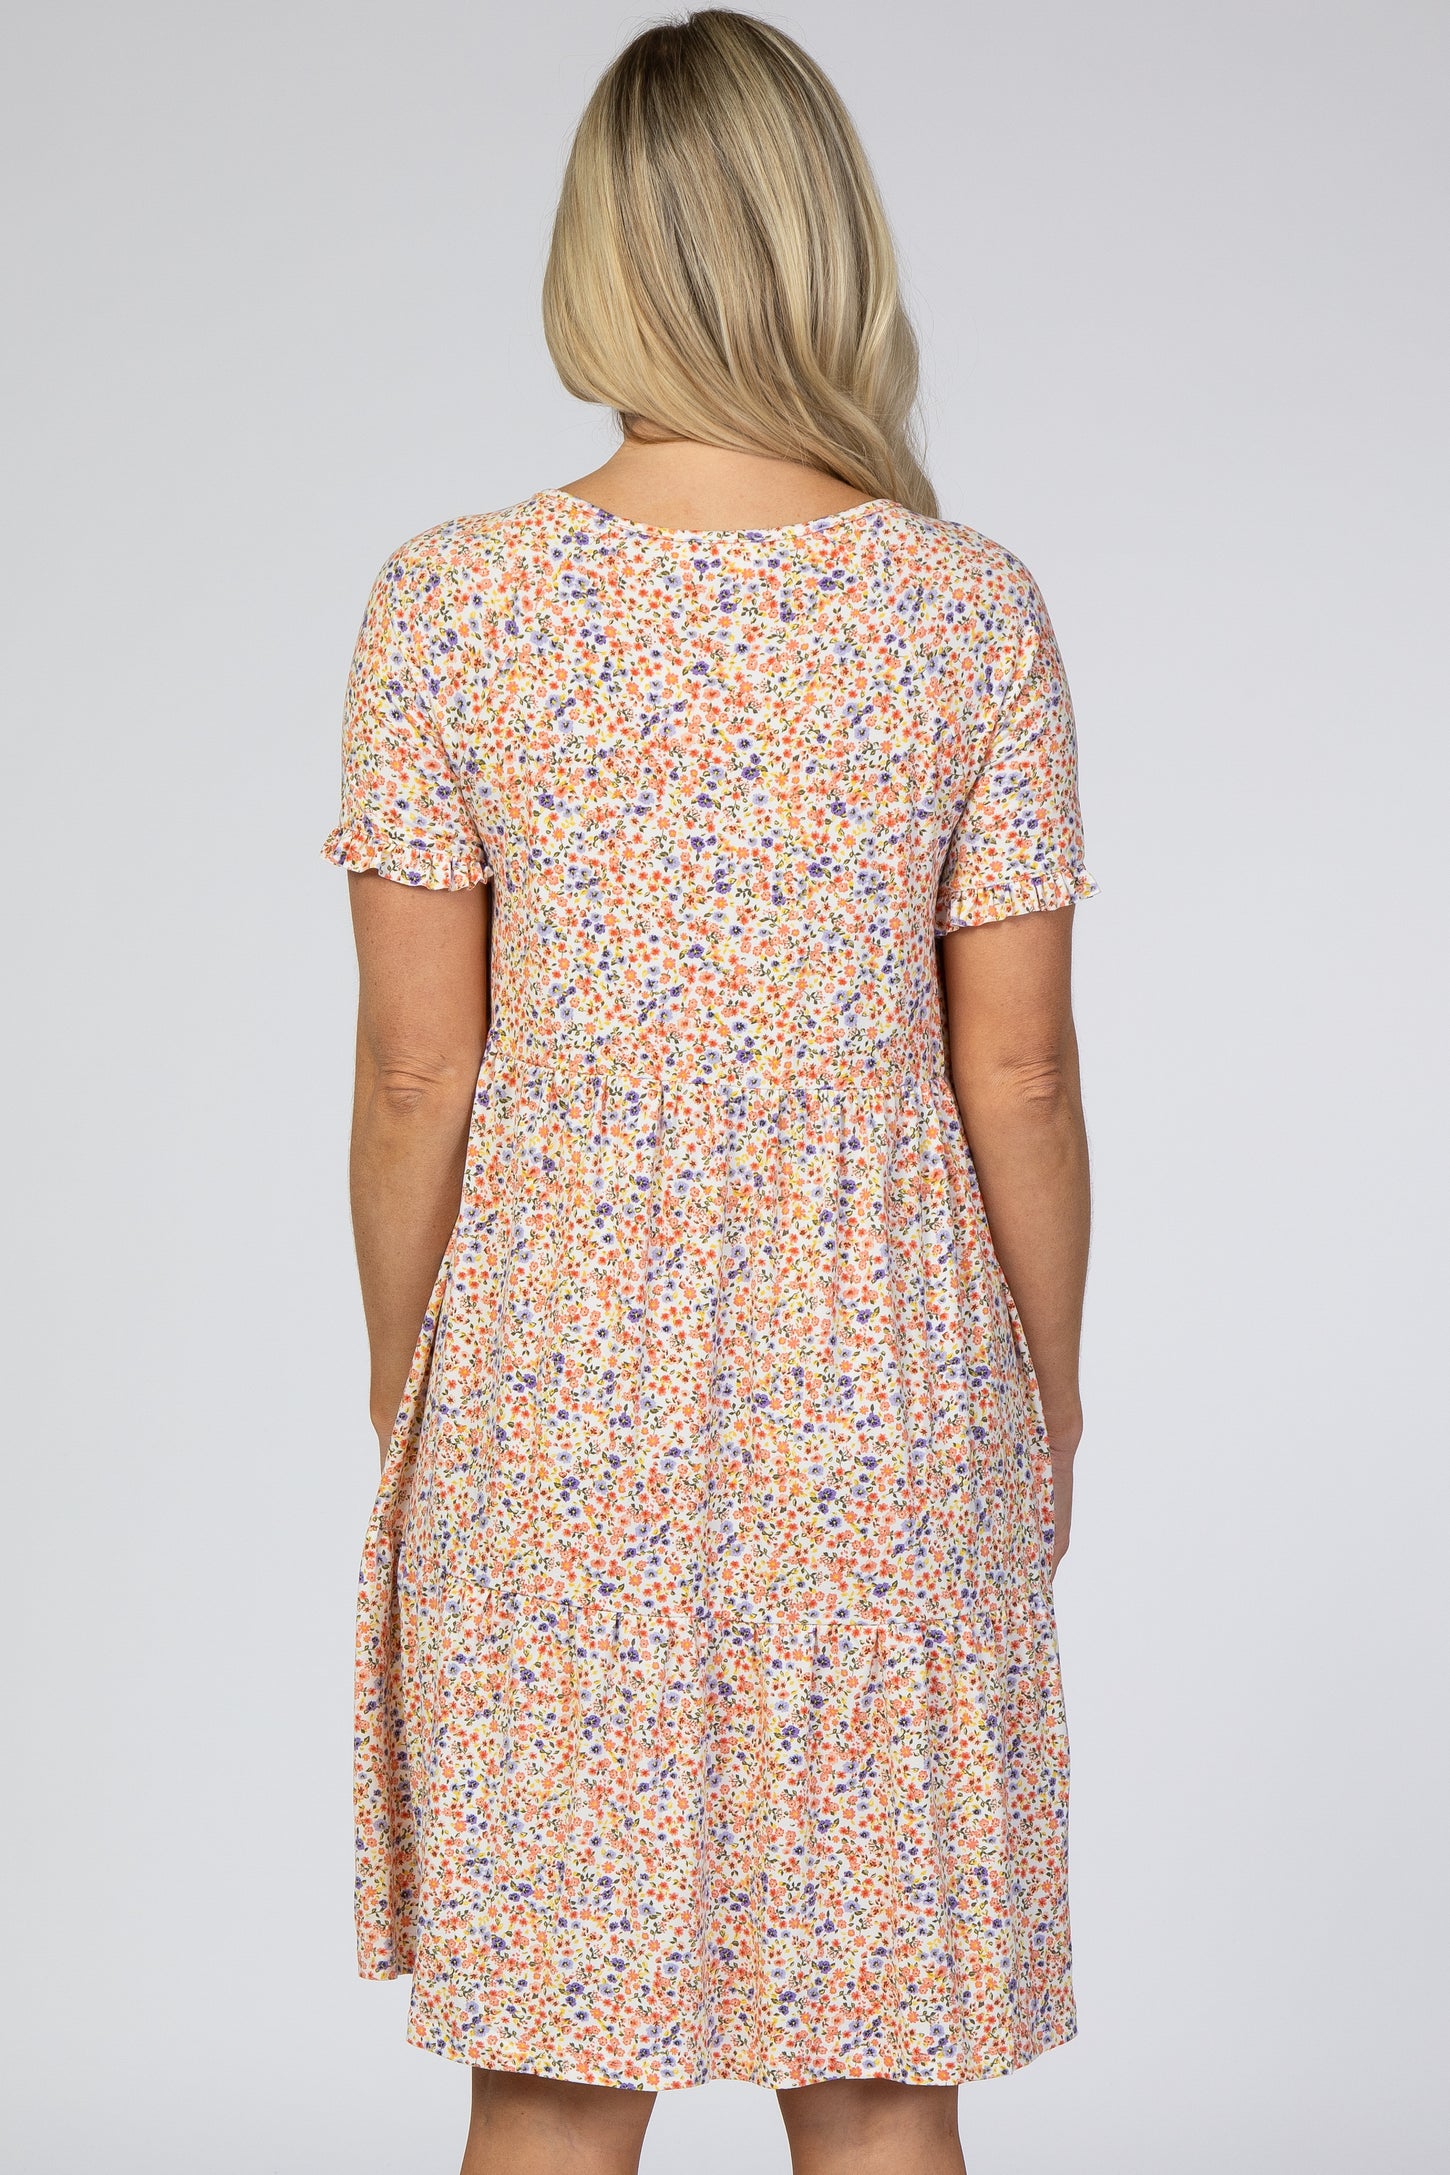 Peach Floral Button Front Maternity Dress